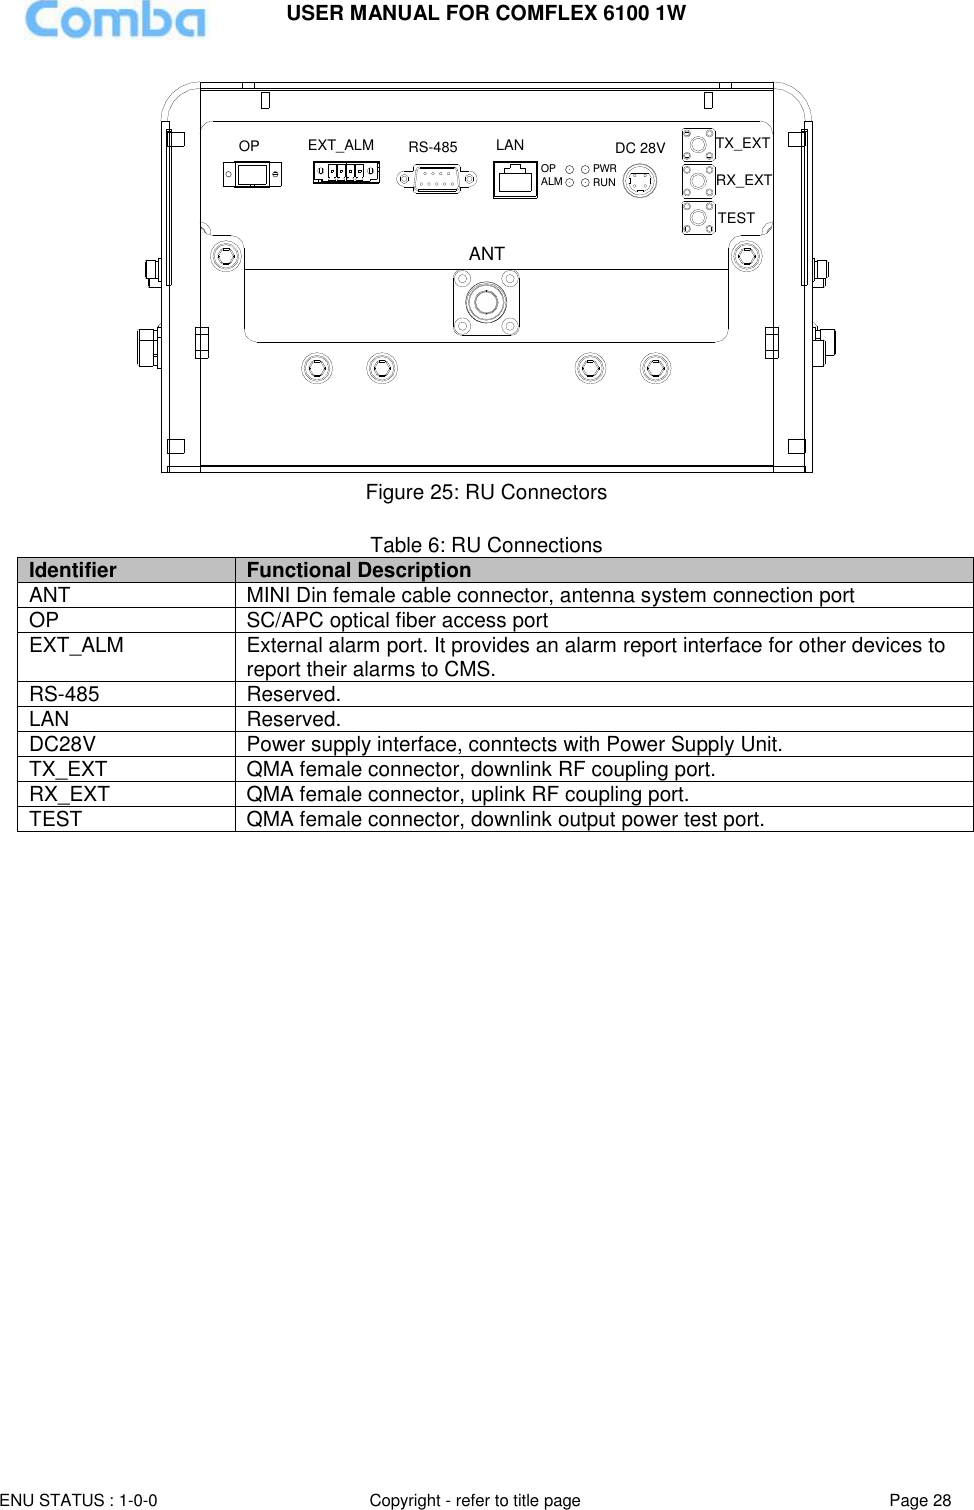 USER MANUAL FOR COMFLEX 6100 1W ENU STATUS : 1-0-0 Copyright - refer to title page Page 28  ANTRX_EXTTX_EXTTESTPWRRUNALMOPDC 28VLANRS-485EXT_ALMOP Figure 25: RU Connectors  Table 6: RU Connections Identifier Functional Description ANT MINI Din female cable connector, antenna system connection port OP  SC/APC optical fiber access port EXT_ALM External alarm port. It provides an alarm report interface for other devices to report their alarms to CMS.  RS-485 Reserved. LAN Reserved.  DC28V Power supply interface, conntects with Power Supply Unit. TX_EXT QMA female connector, downlink RF coupling port. RX_EXT QMA female connector, uplink RF coupling port. TEST QMA female connector, downlink output power test port. 